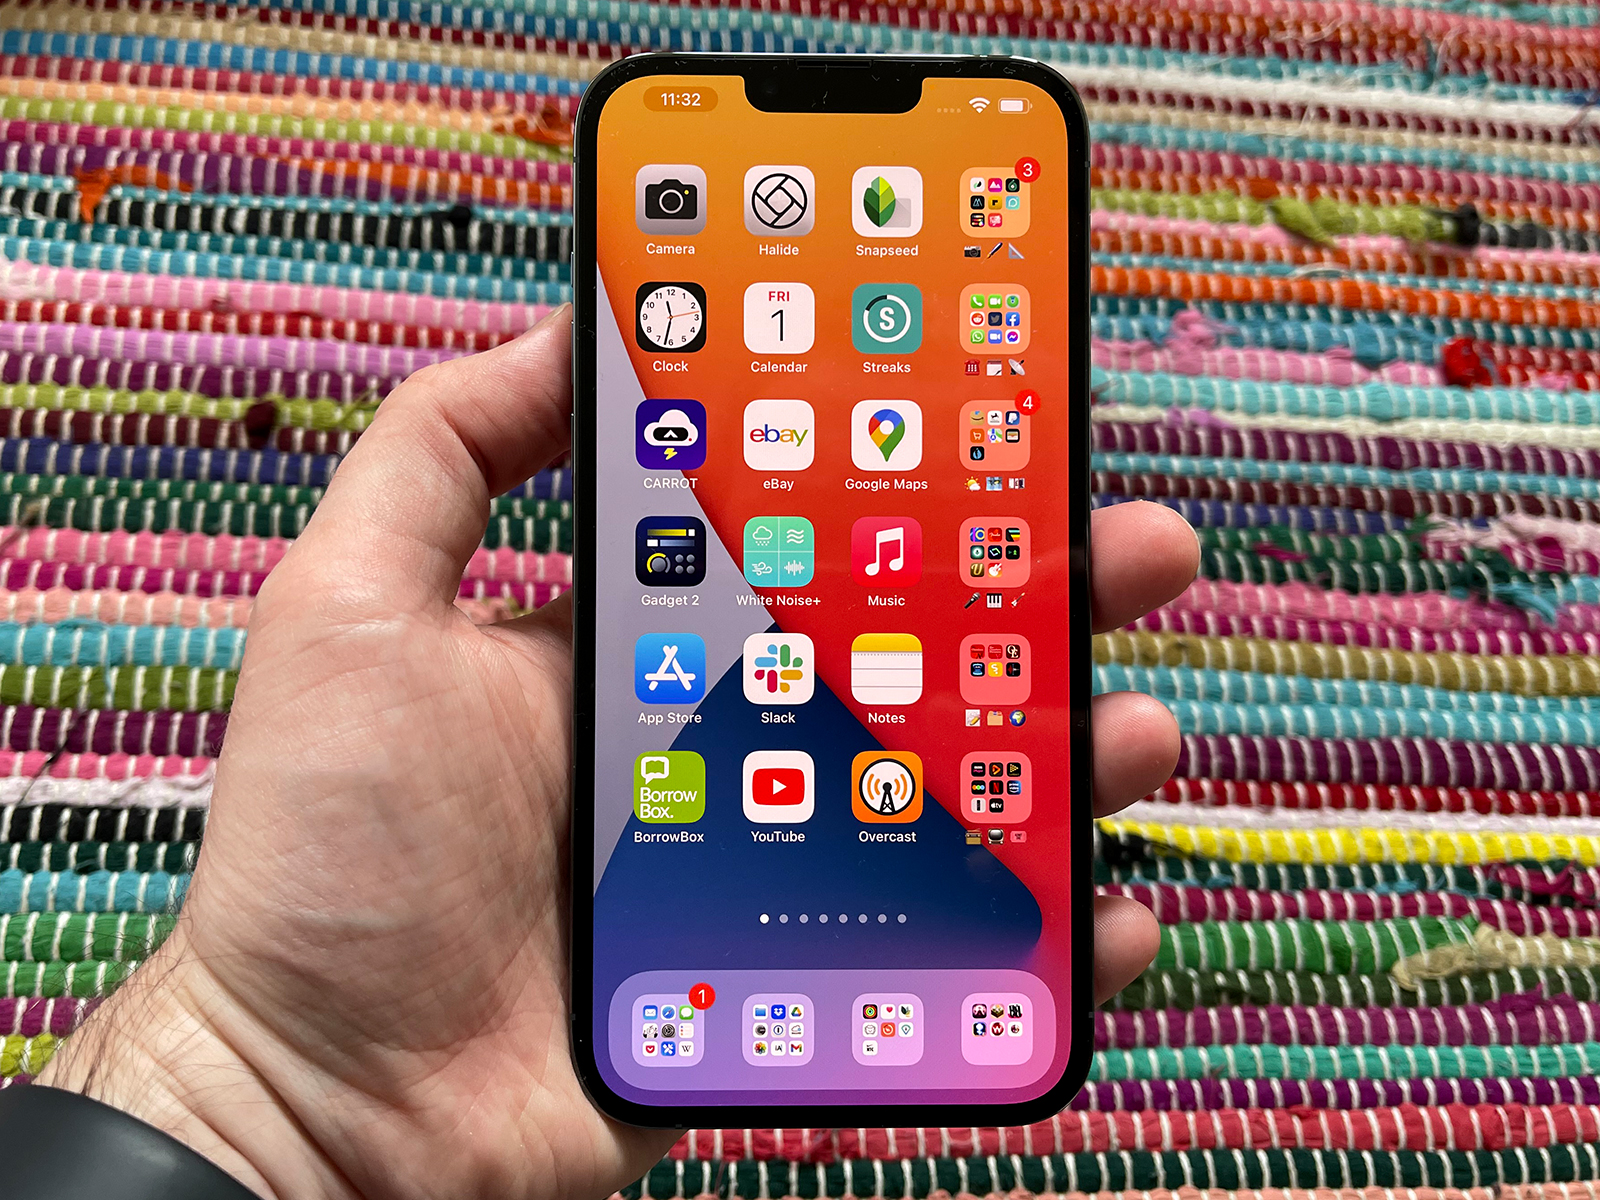 iPhone 13 Pro Max: 5 thoughts after 3 weeks with Apple's new